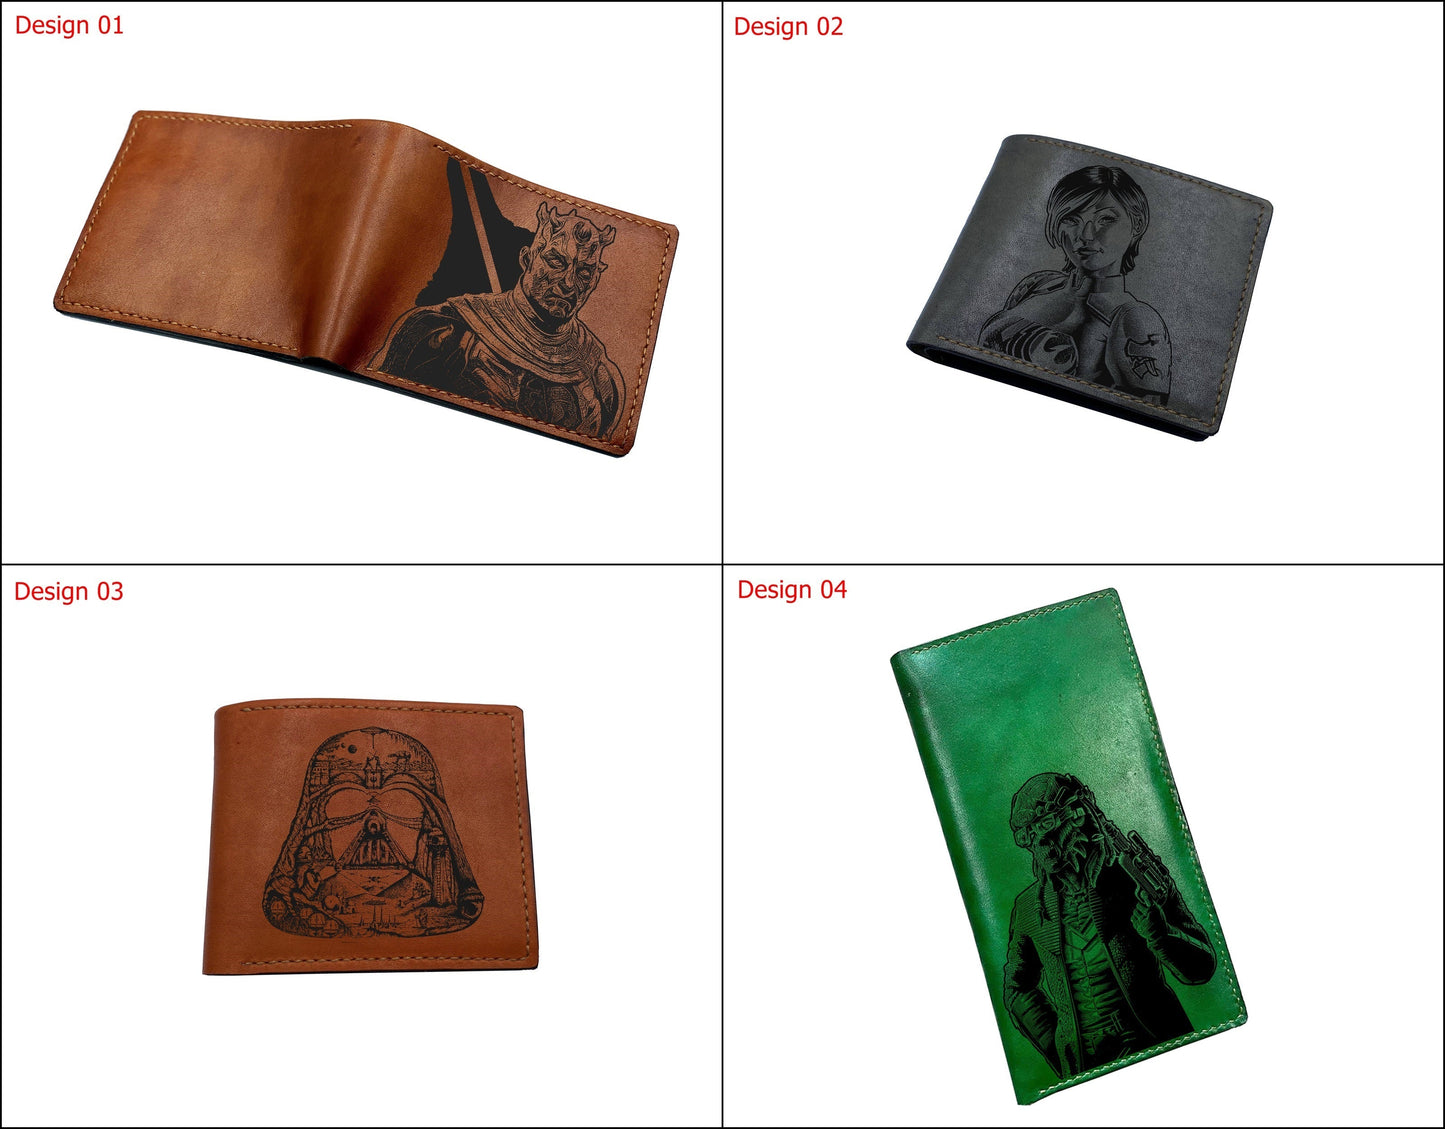 Customized Starwars art wallet, genuine leather bifold wallet, wallet for dad, starwars fan wallet, gift for him